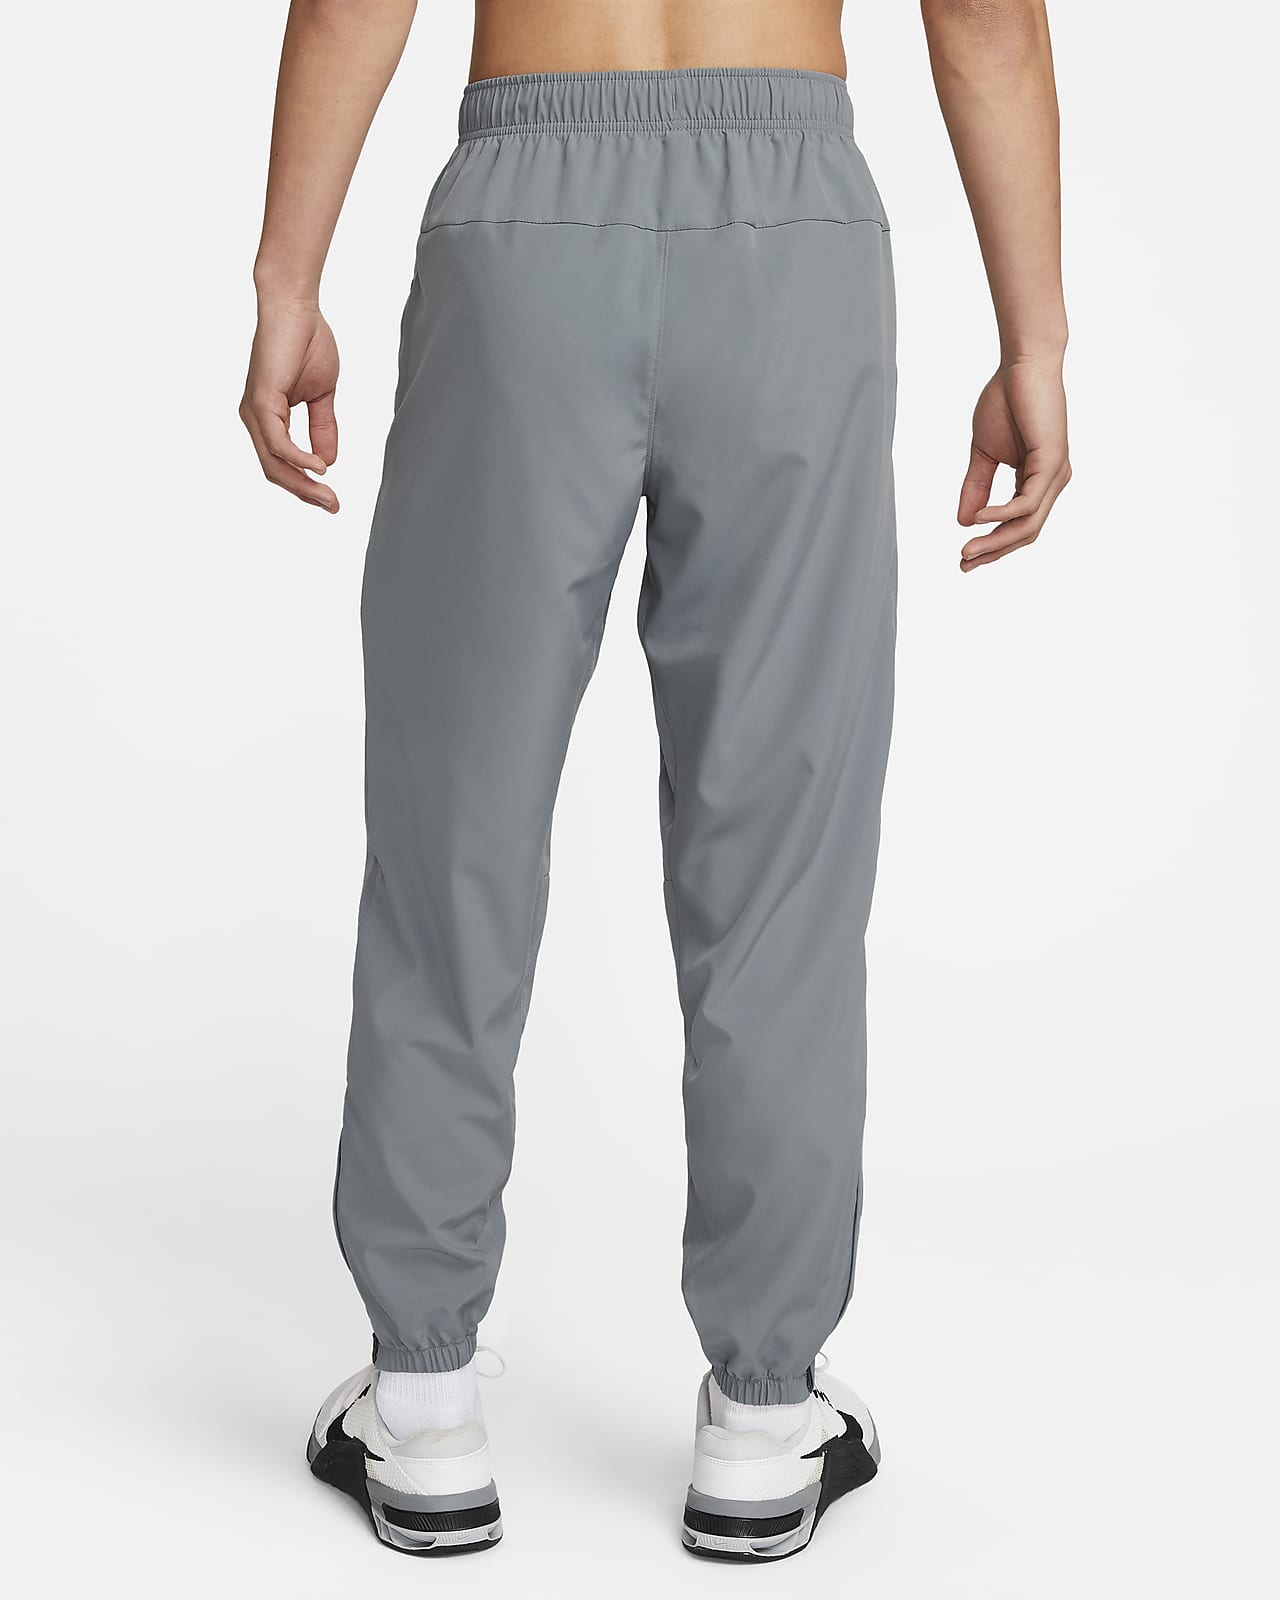 Plus Size Running Trousers & Tights. Nike CA